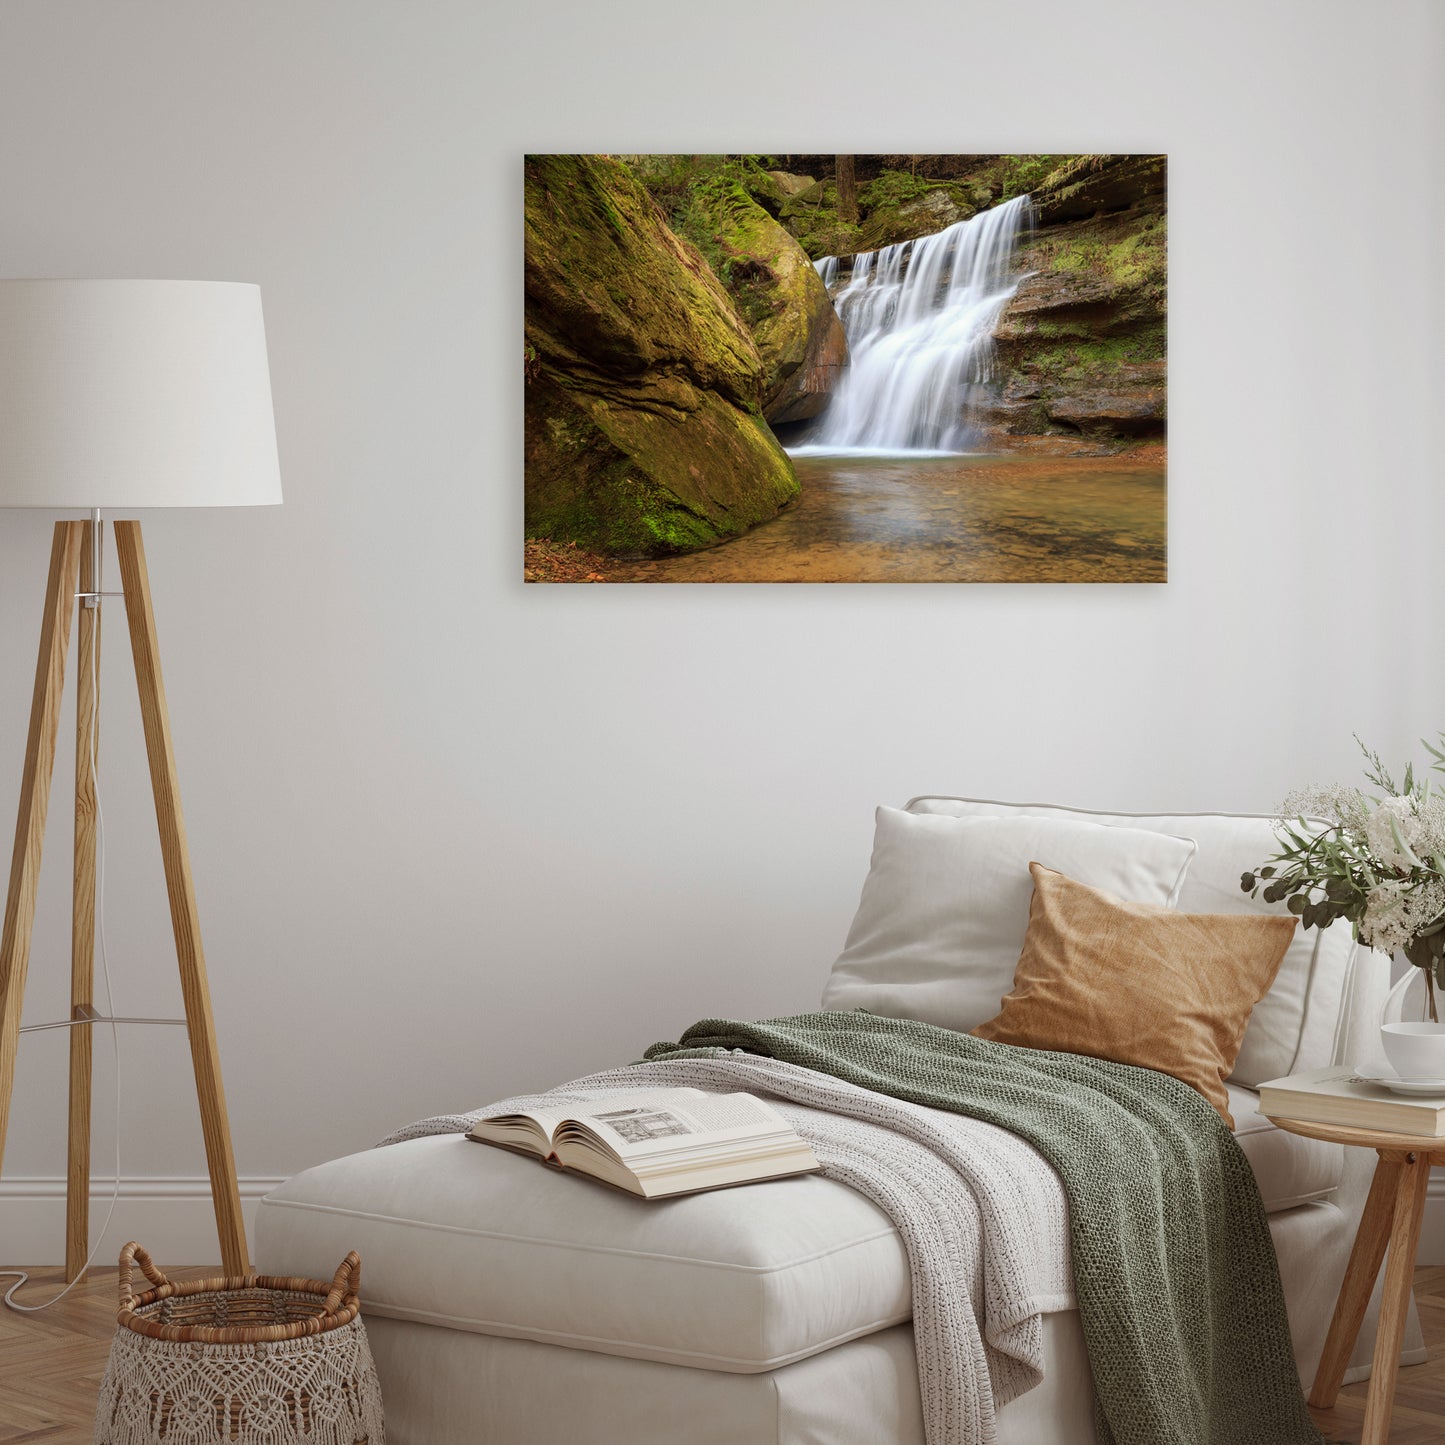 Hocking Hills captured at its best: a cascading waterfall on quality canvas.